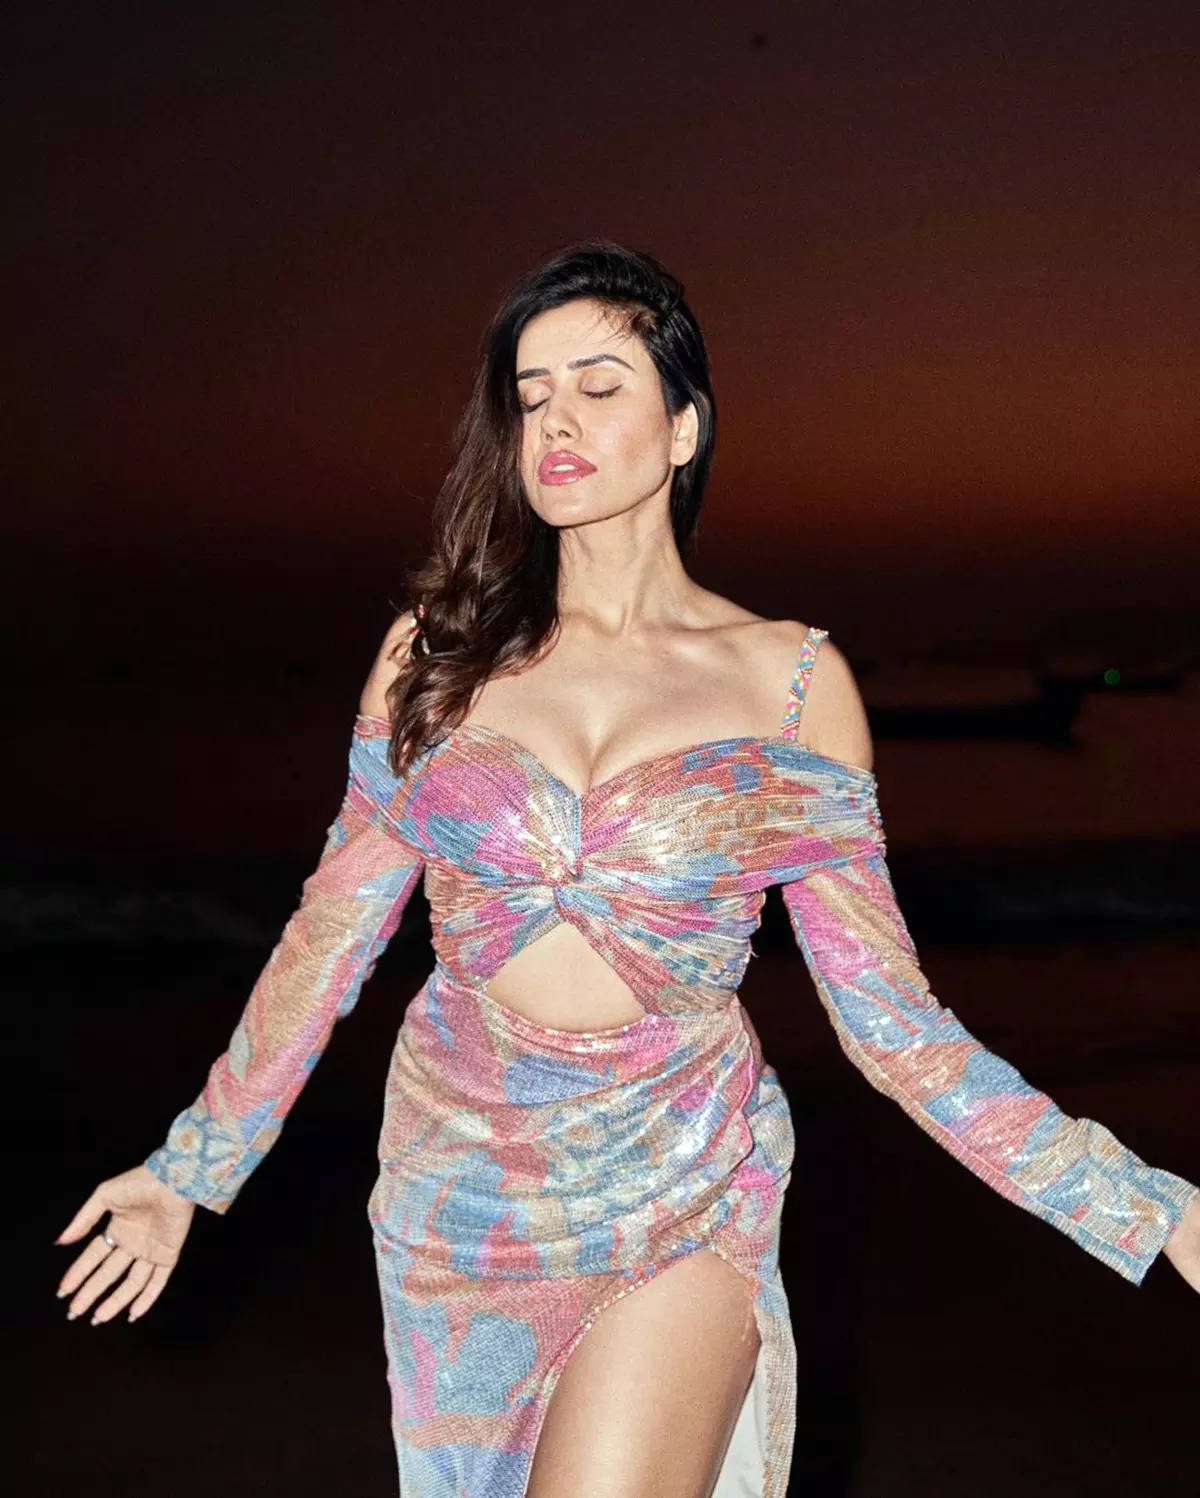 Sonnalli Seygall is teasing the cyberspace with her gorgeous pictures